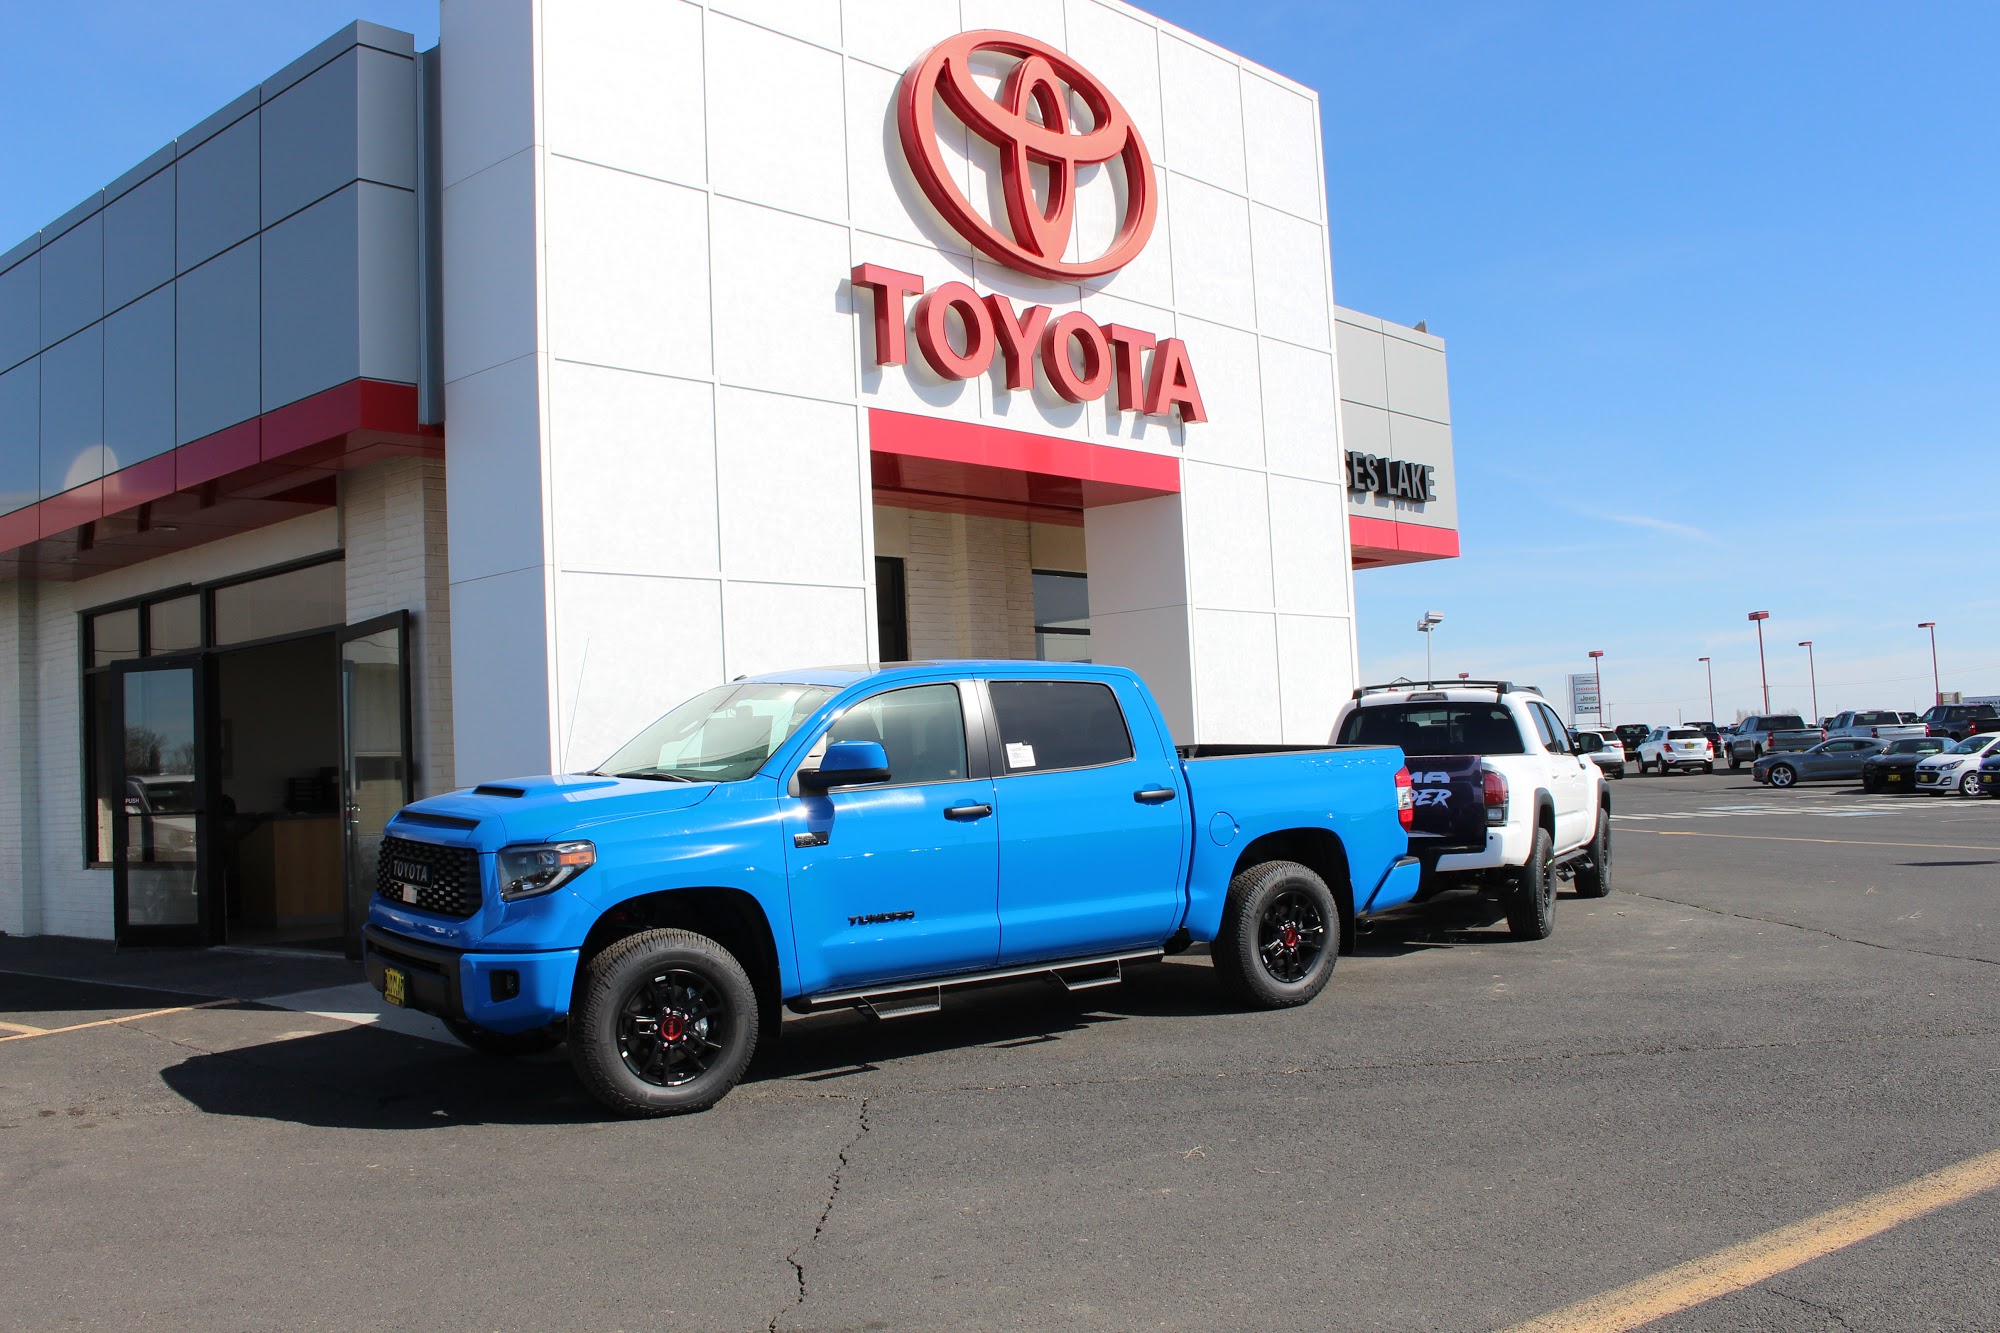 Toyota of Moses Lake Parts Store